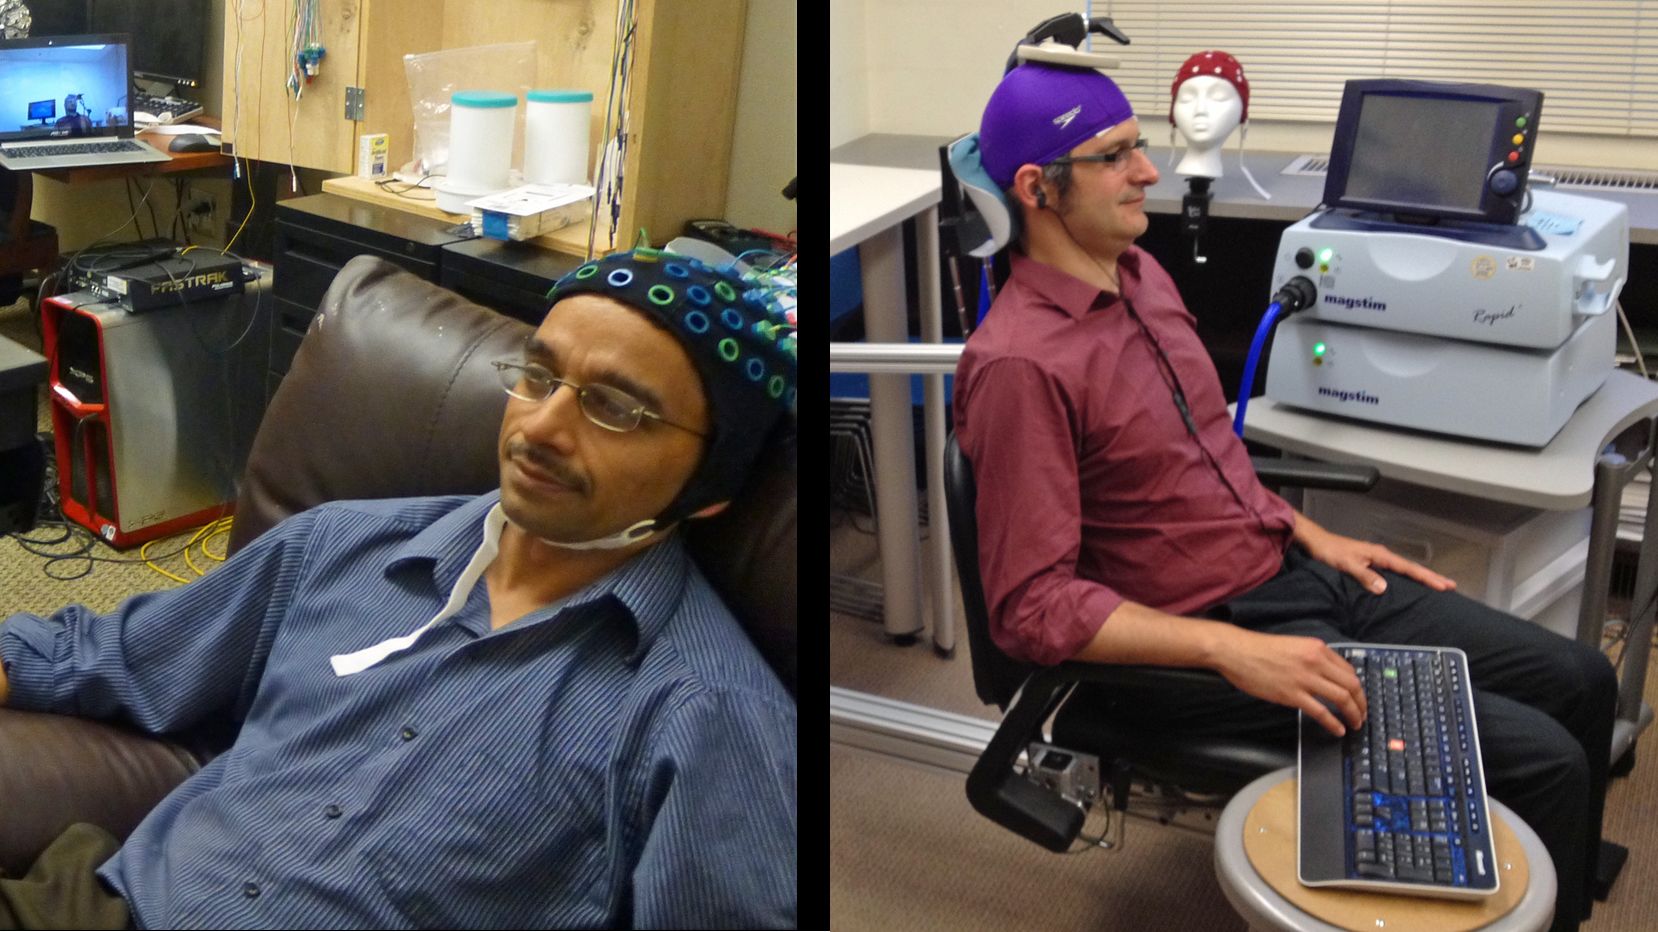 Rajesh Rao, left, sends brain signals to Andrea Stocco, right, in a different laboratory.